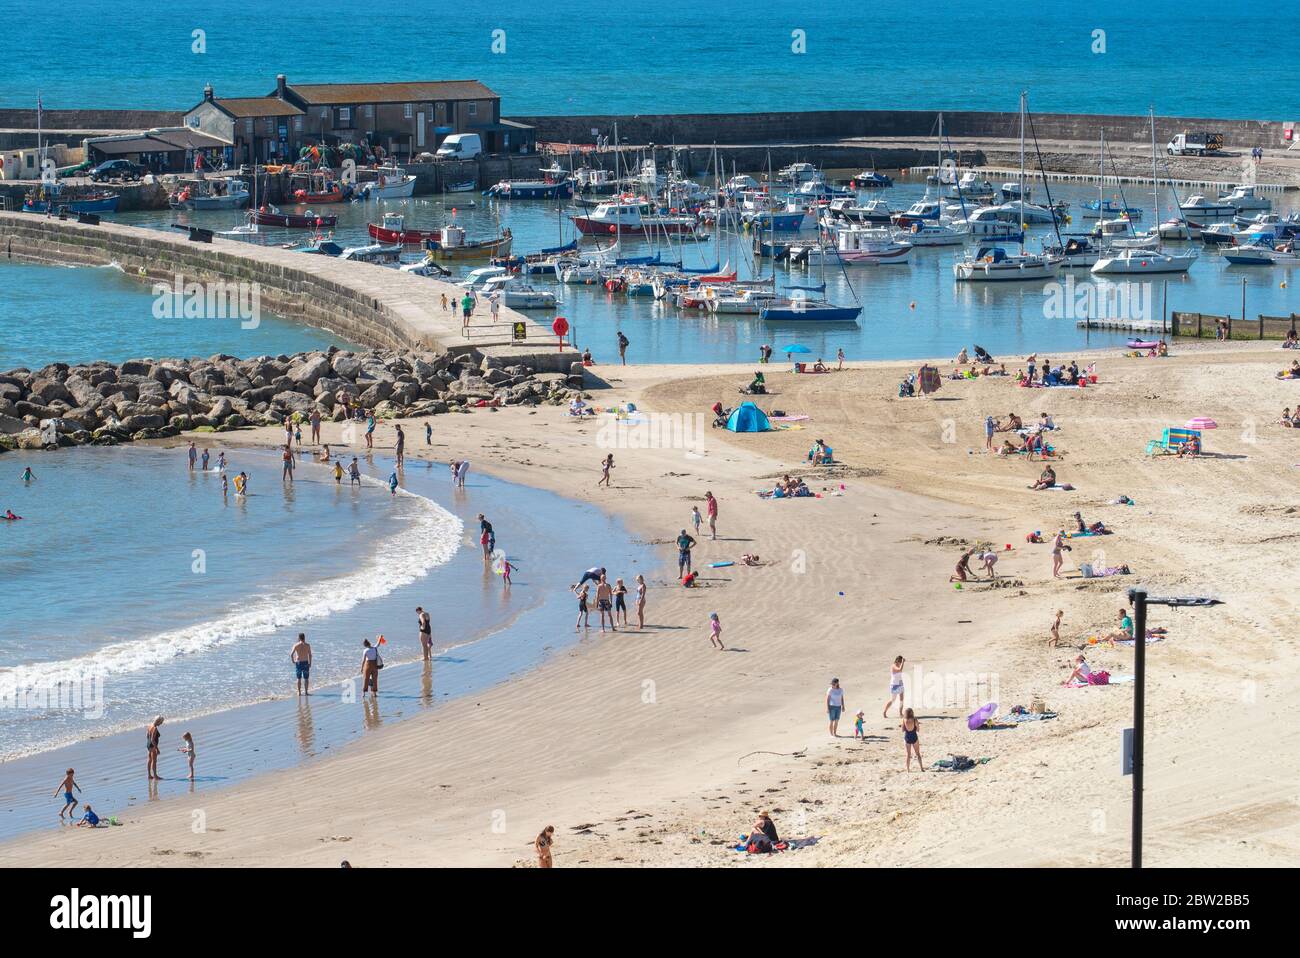 Lyme Regis, Dorset, UK. 29th May, 2020. UK Weather. Scorching hot sunshine and clear blue skies at the seaside resort of Lyme Regis on the hottest day of the year so far. Families and beachgoers are expected to flock to the beach to enjoy socially-distanced sunbathing as the heatwave continues into the weekend. Credit: Celia McMahon/Alamy Live News Stock Photo